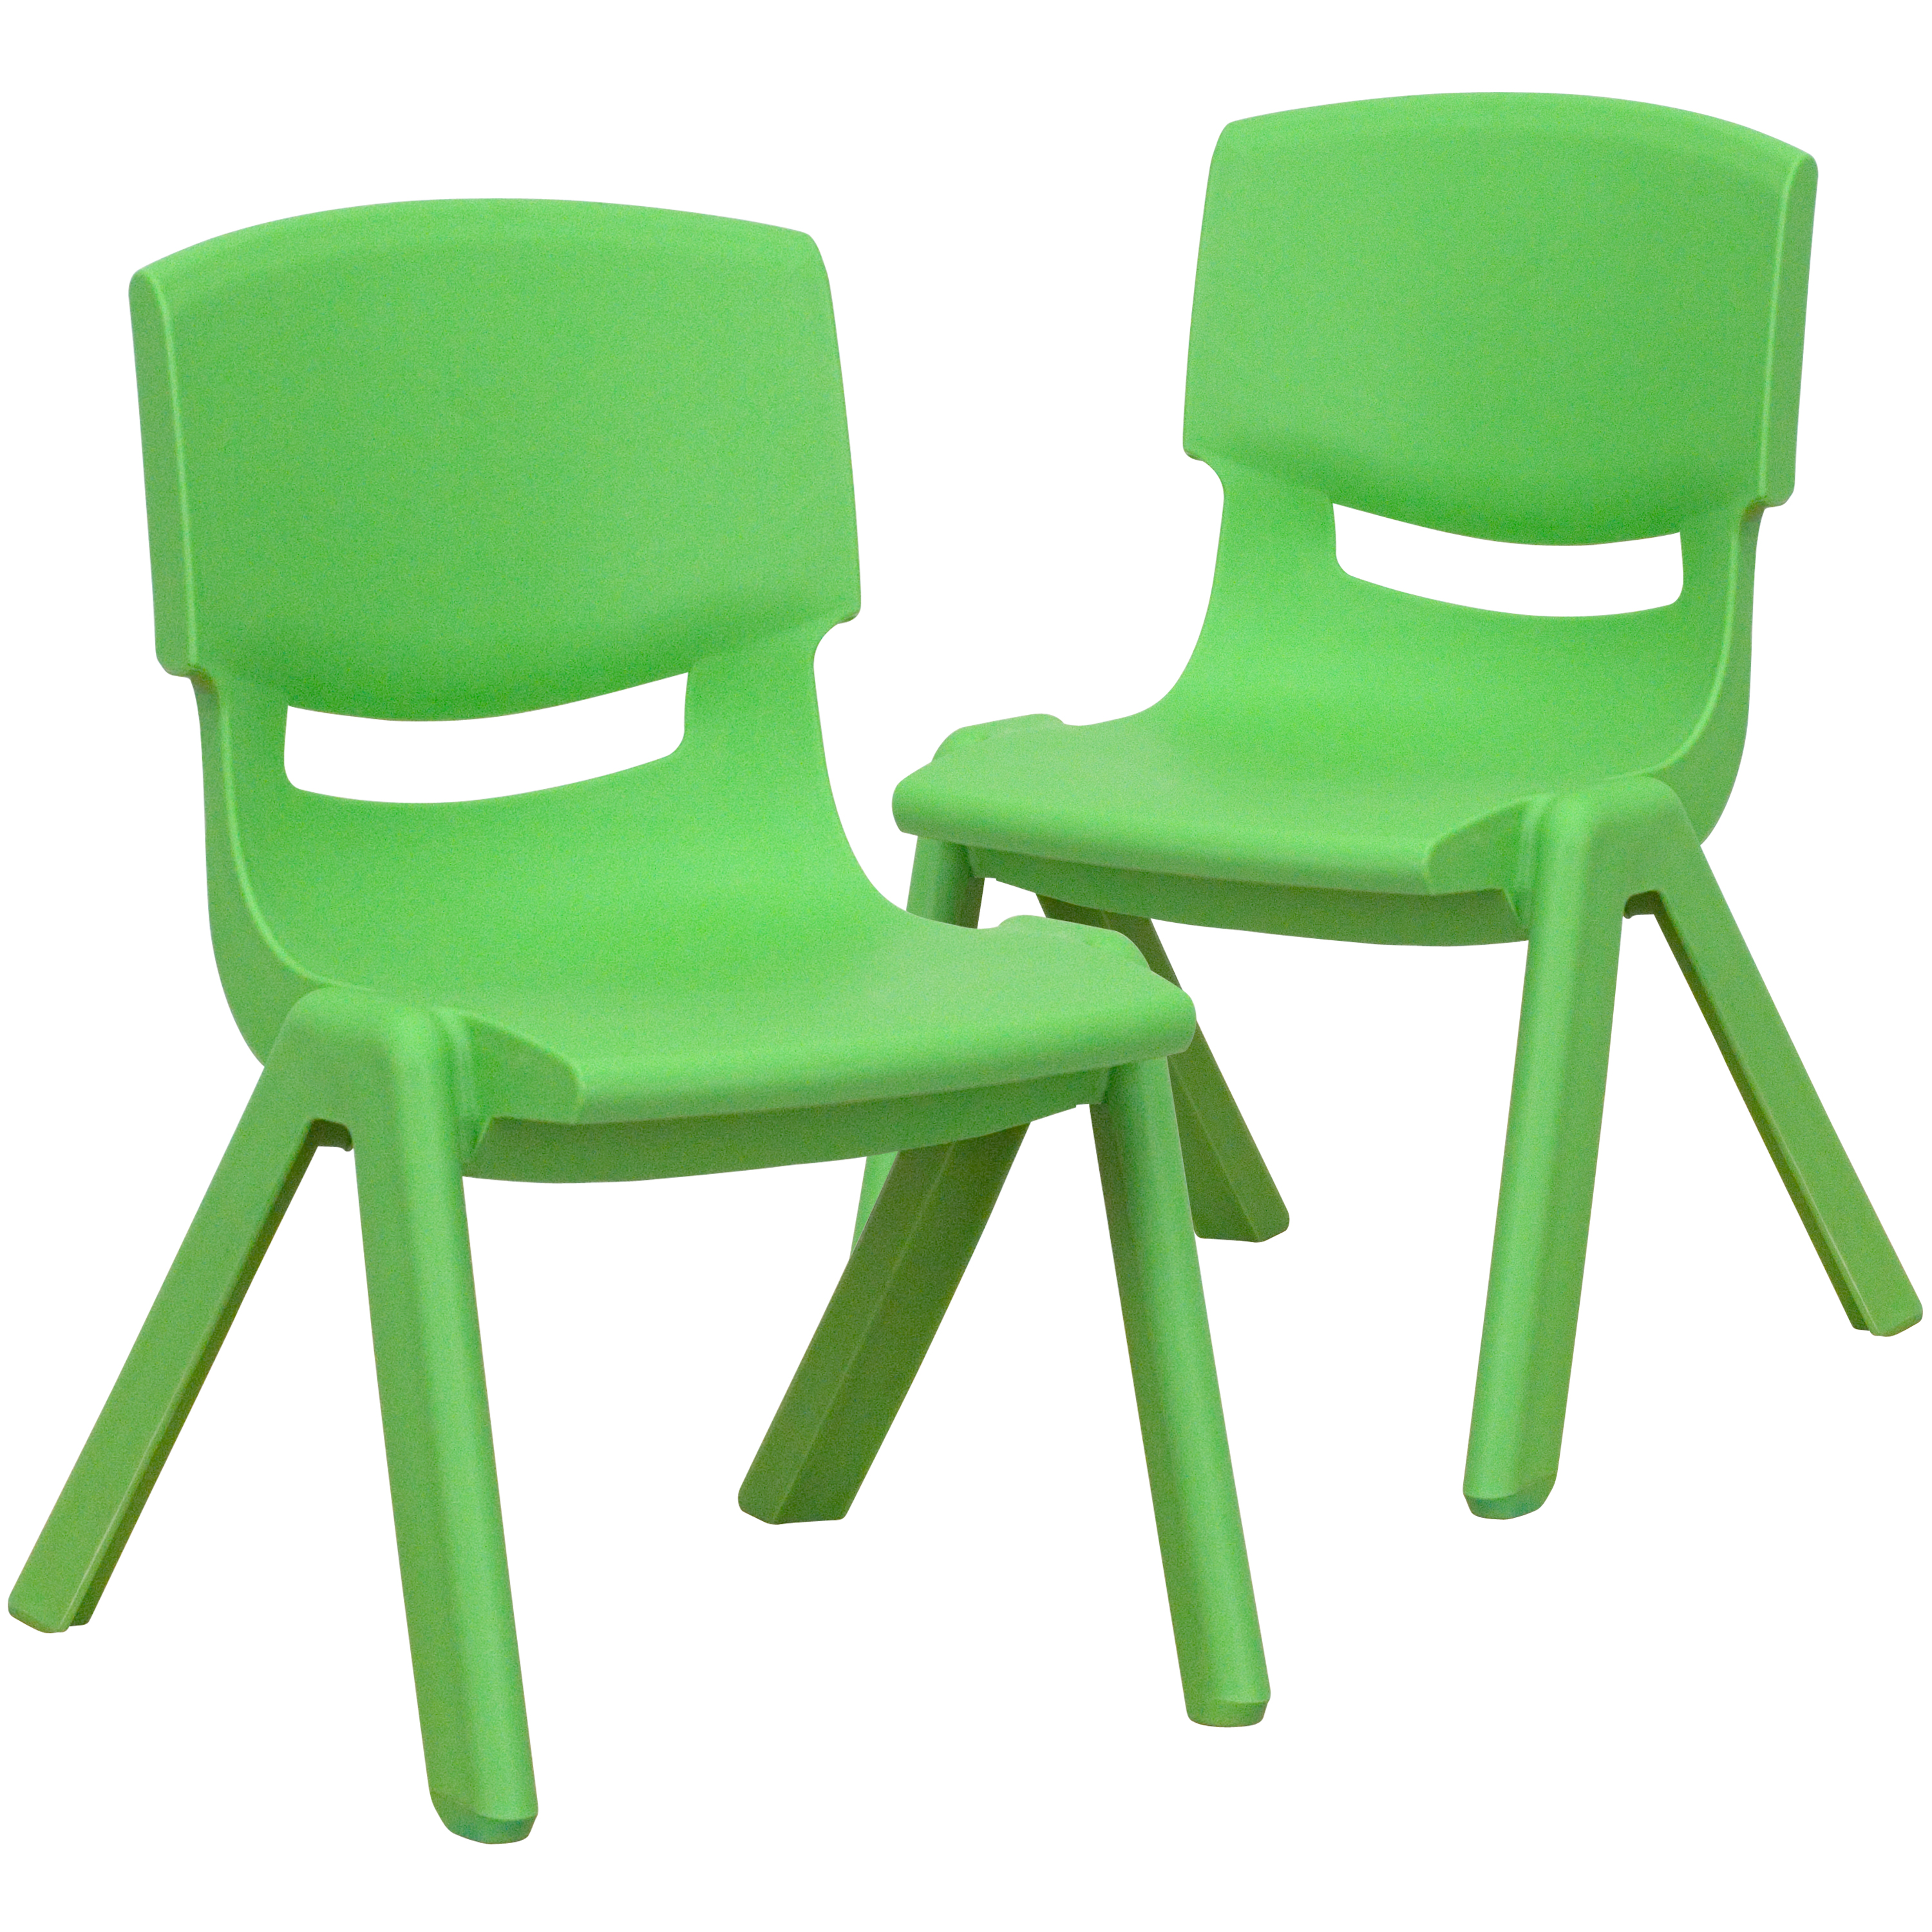 Flash Furniture 2-YU-YCX-003-GREEN-GG Green Plastic Stackable School Chair with 10.5'' Seat Height, 2 Pack